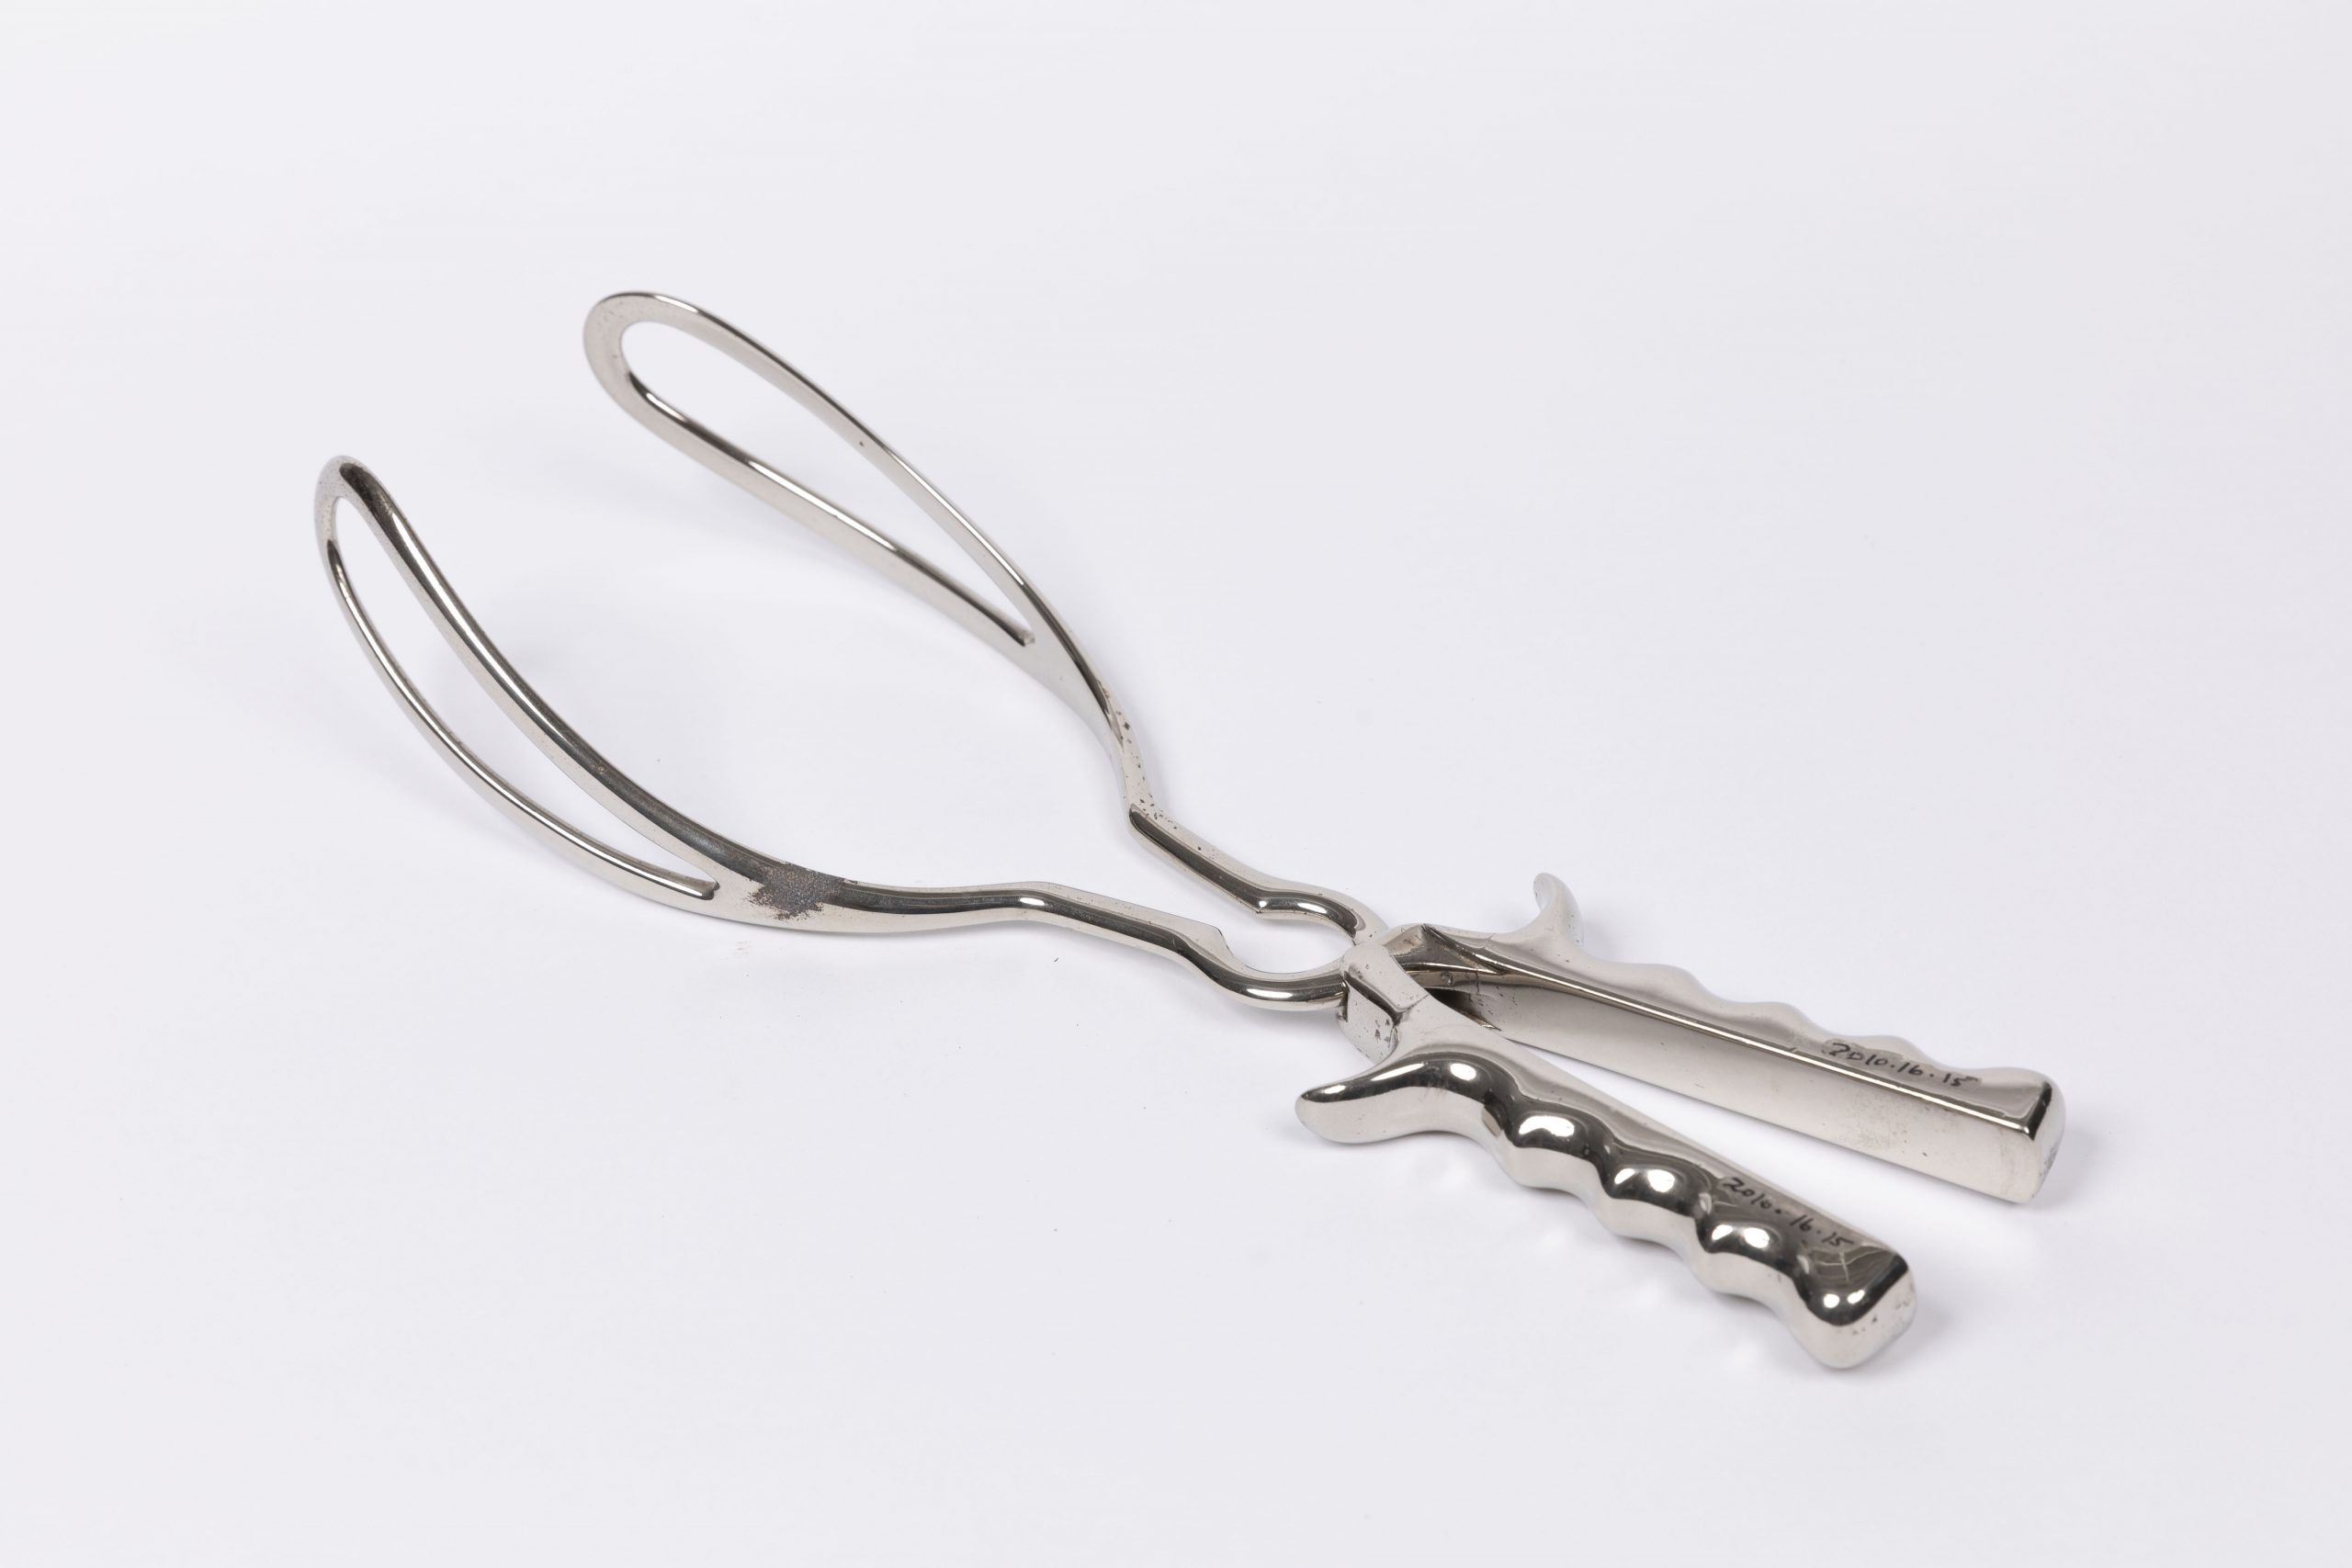 Stainless steel obstetric forceps, 1950s.